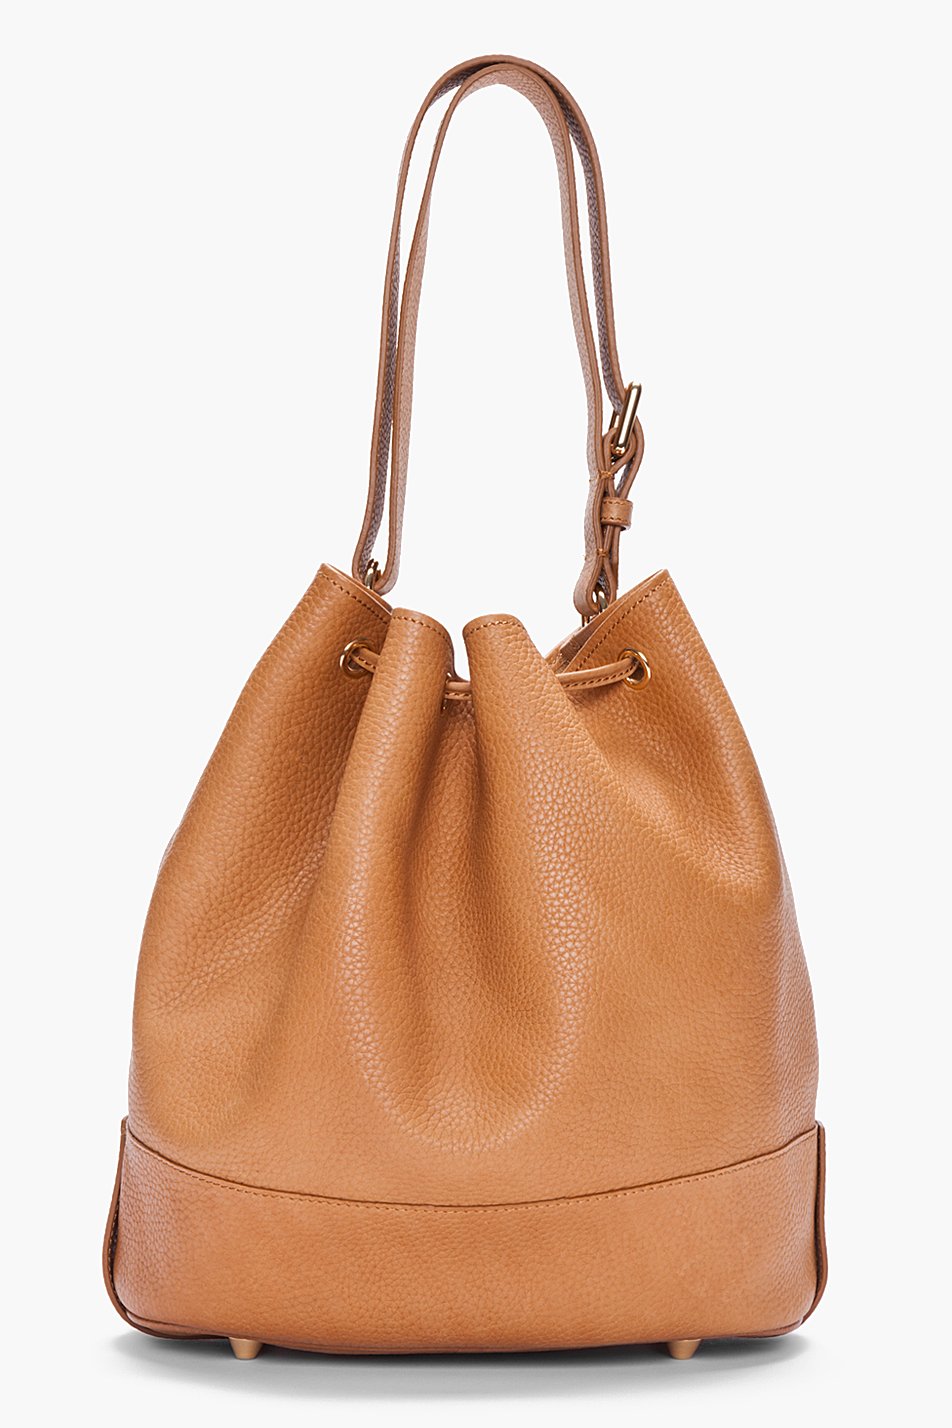 Lyst - A.p.c. Brown Pebbled Leather Bucket Bag in Brown